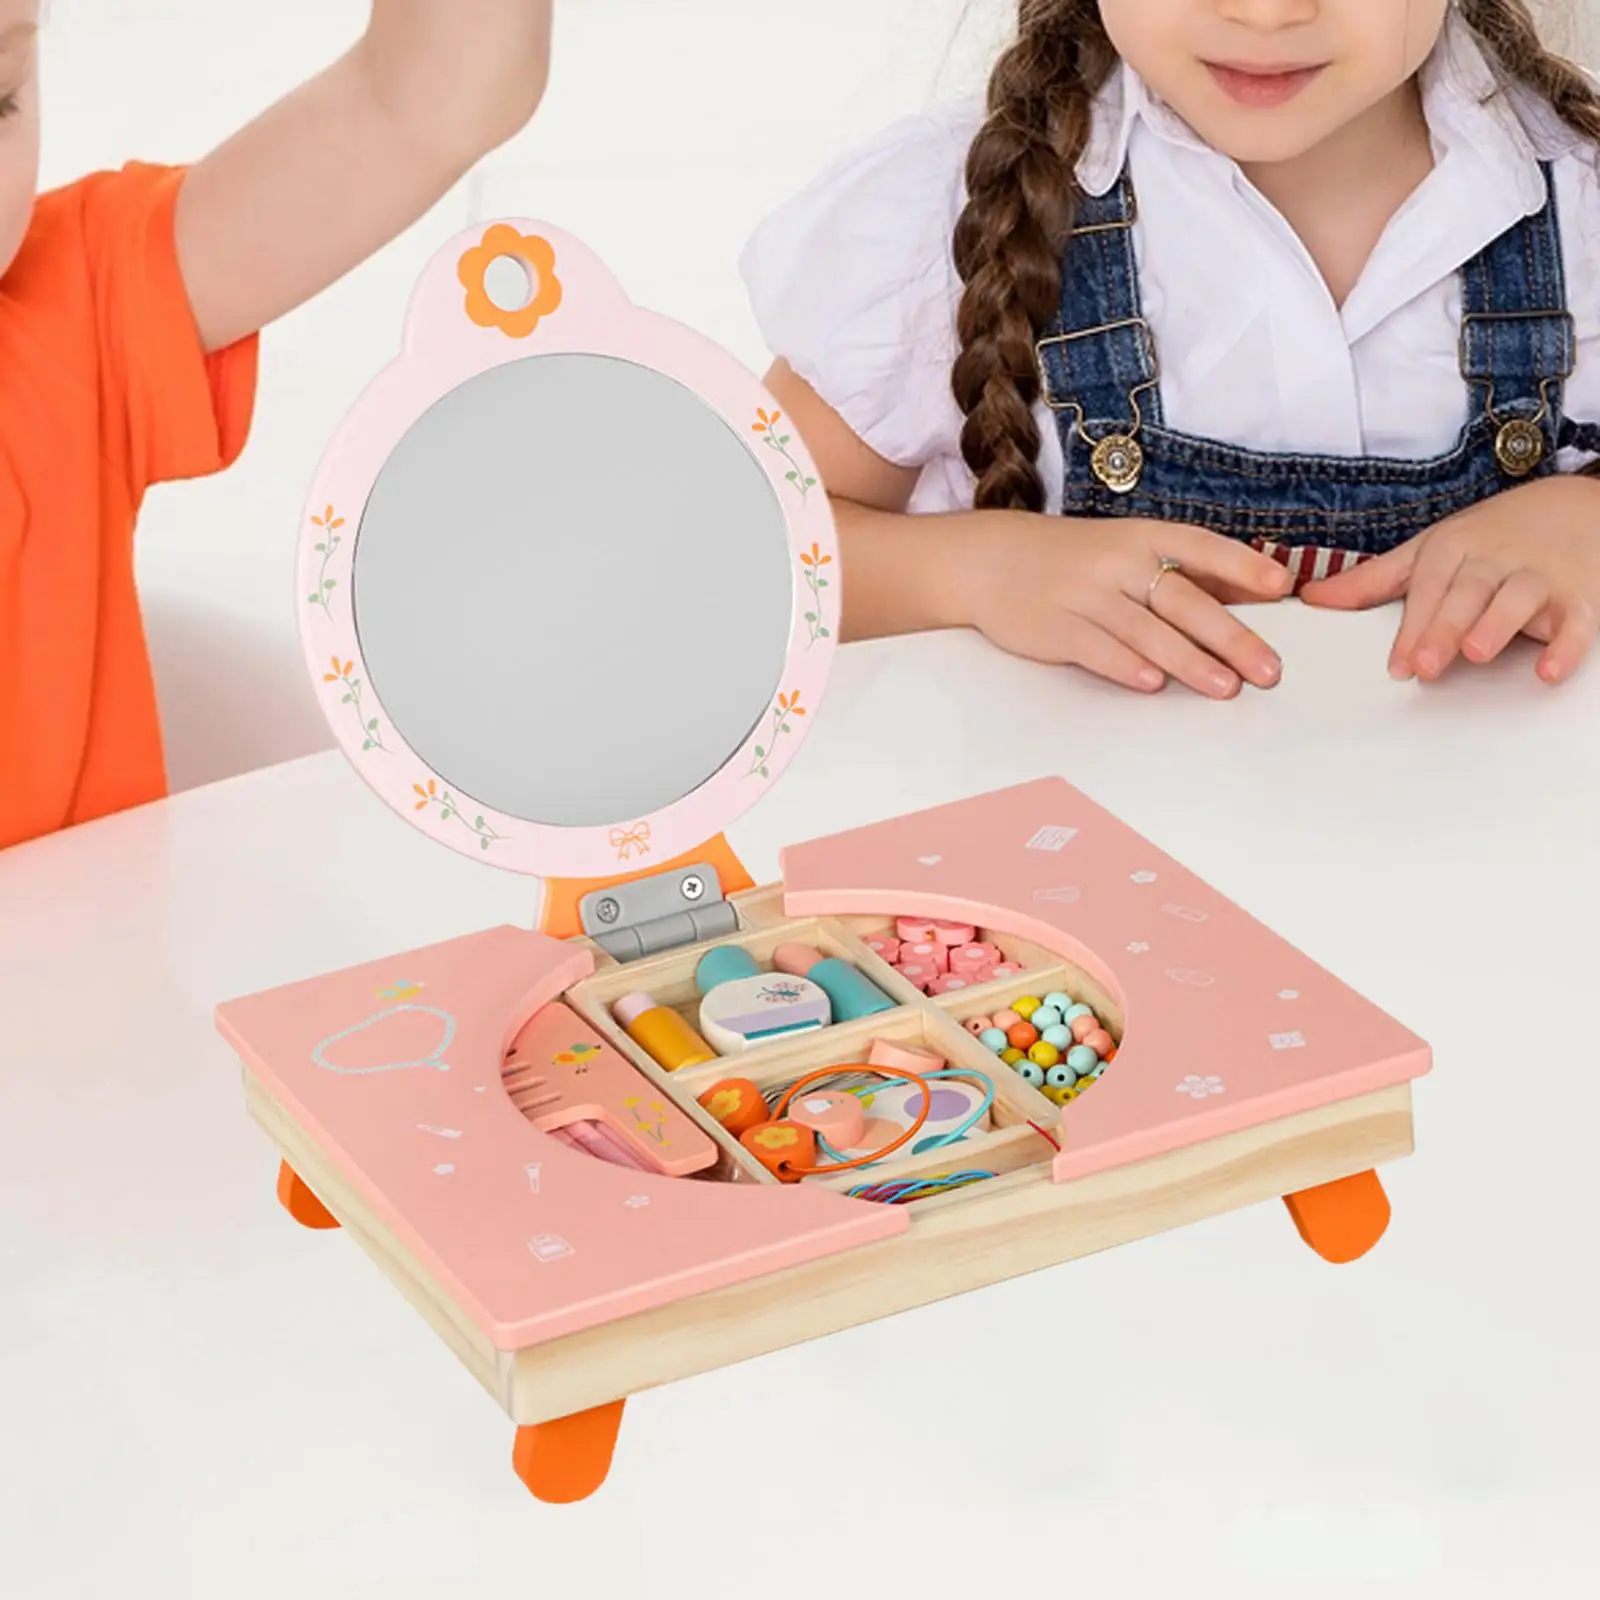 Tabletop Dresser Makeup Toy Portable Playset Learning Toys Makeup Vanity Toys Kids Makeup Vanity Toy for Toddlers Birthday Gifts